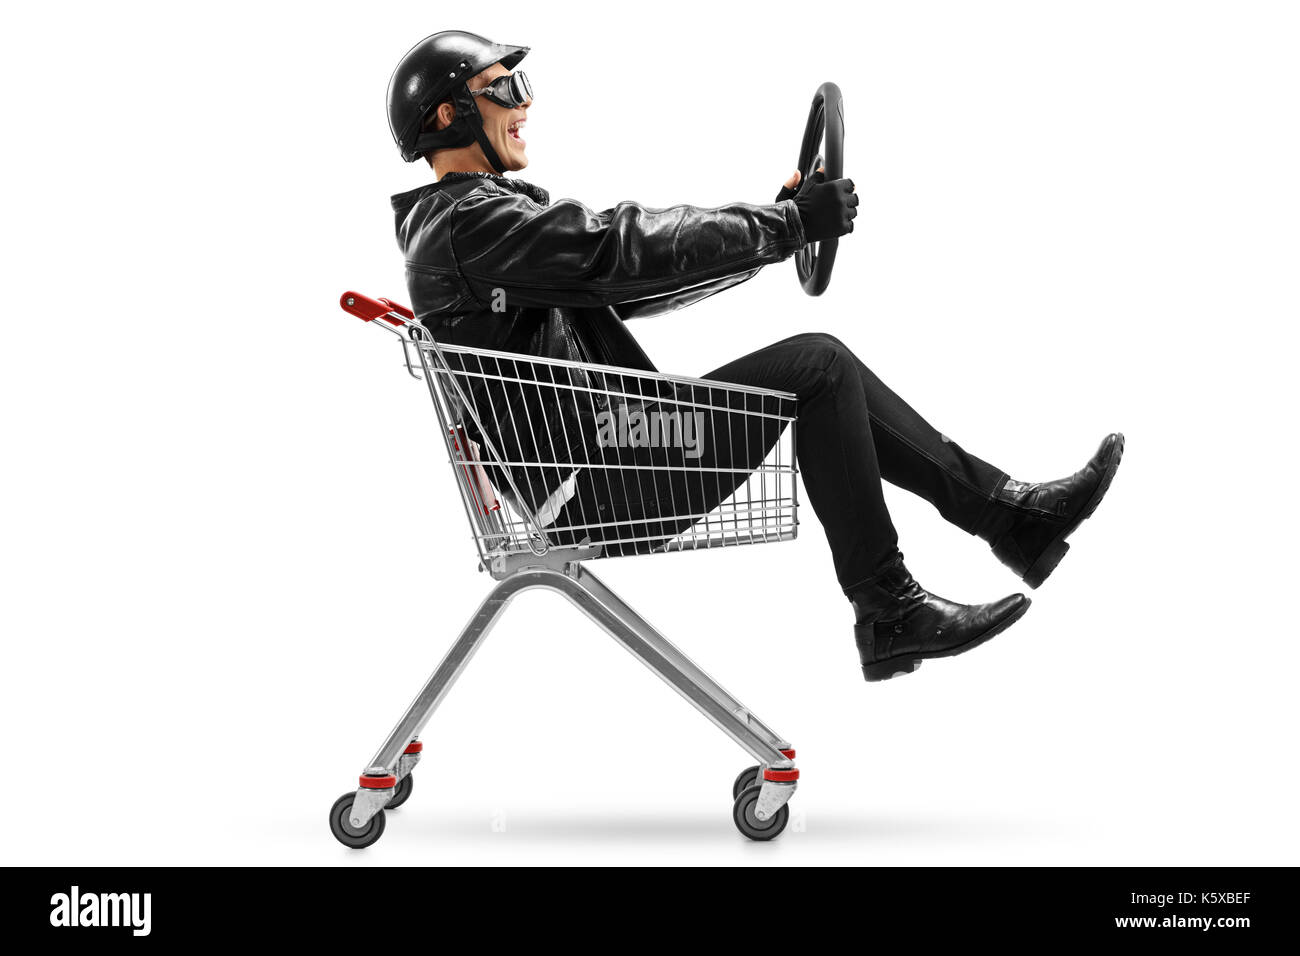 Biker riding in a shopping cart and holding a steering wheel isolated on white background Stock Photo